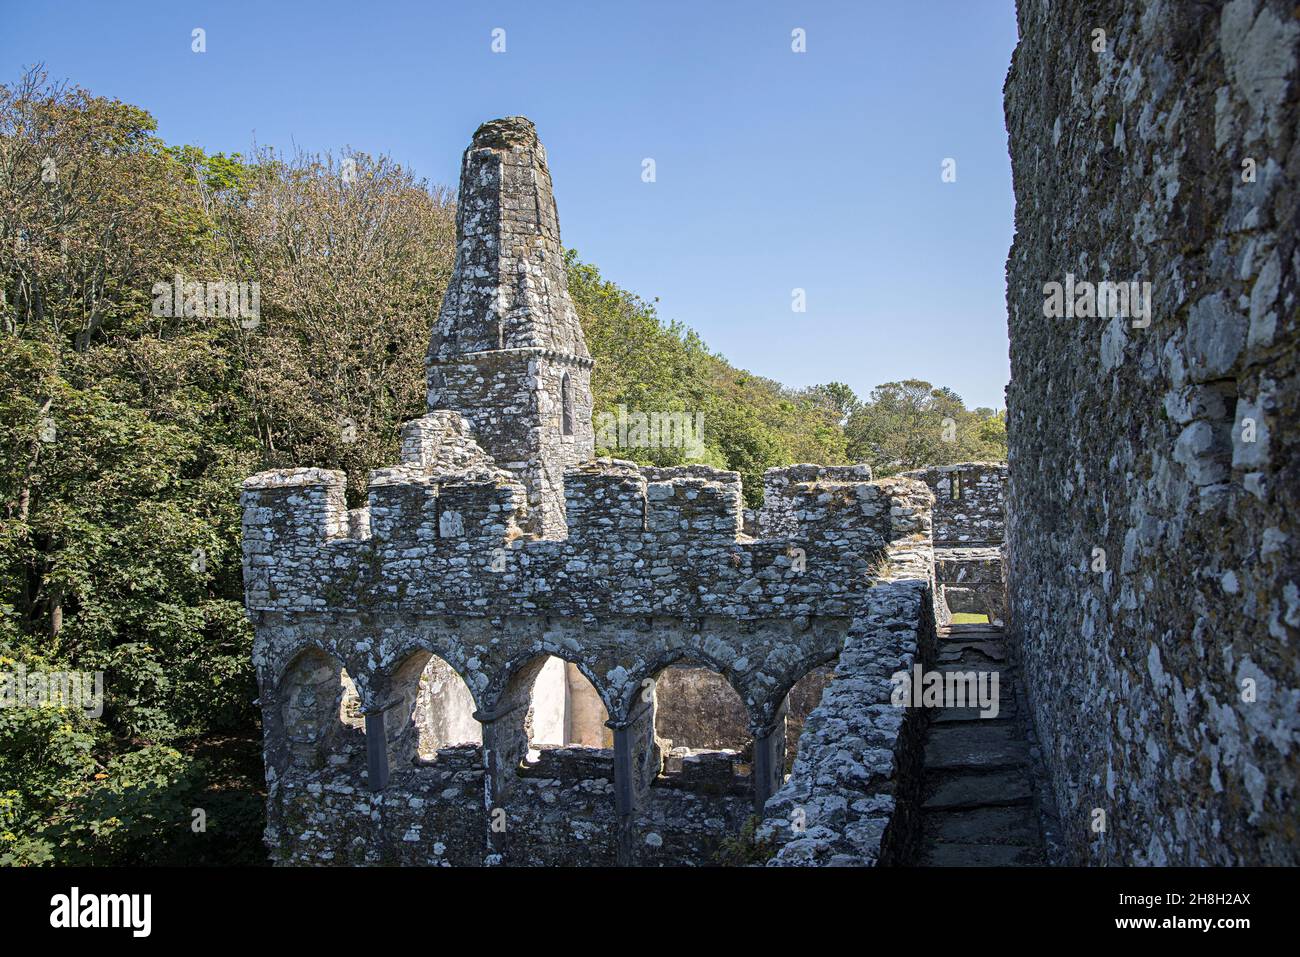 Roof of the Chapel with the Belfry, Bishop's Palace, St Davids, Pembrokeshire, Wales, UK Stock Photo